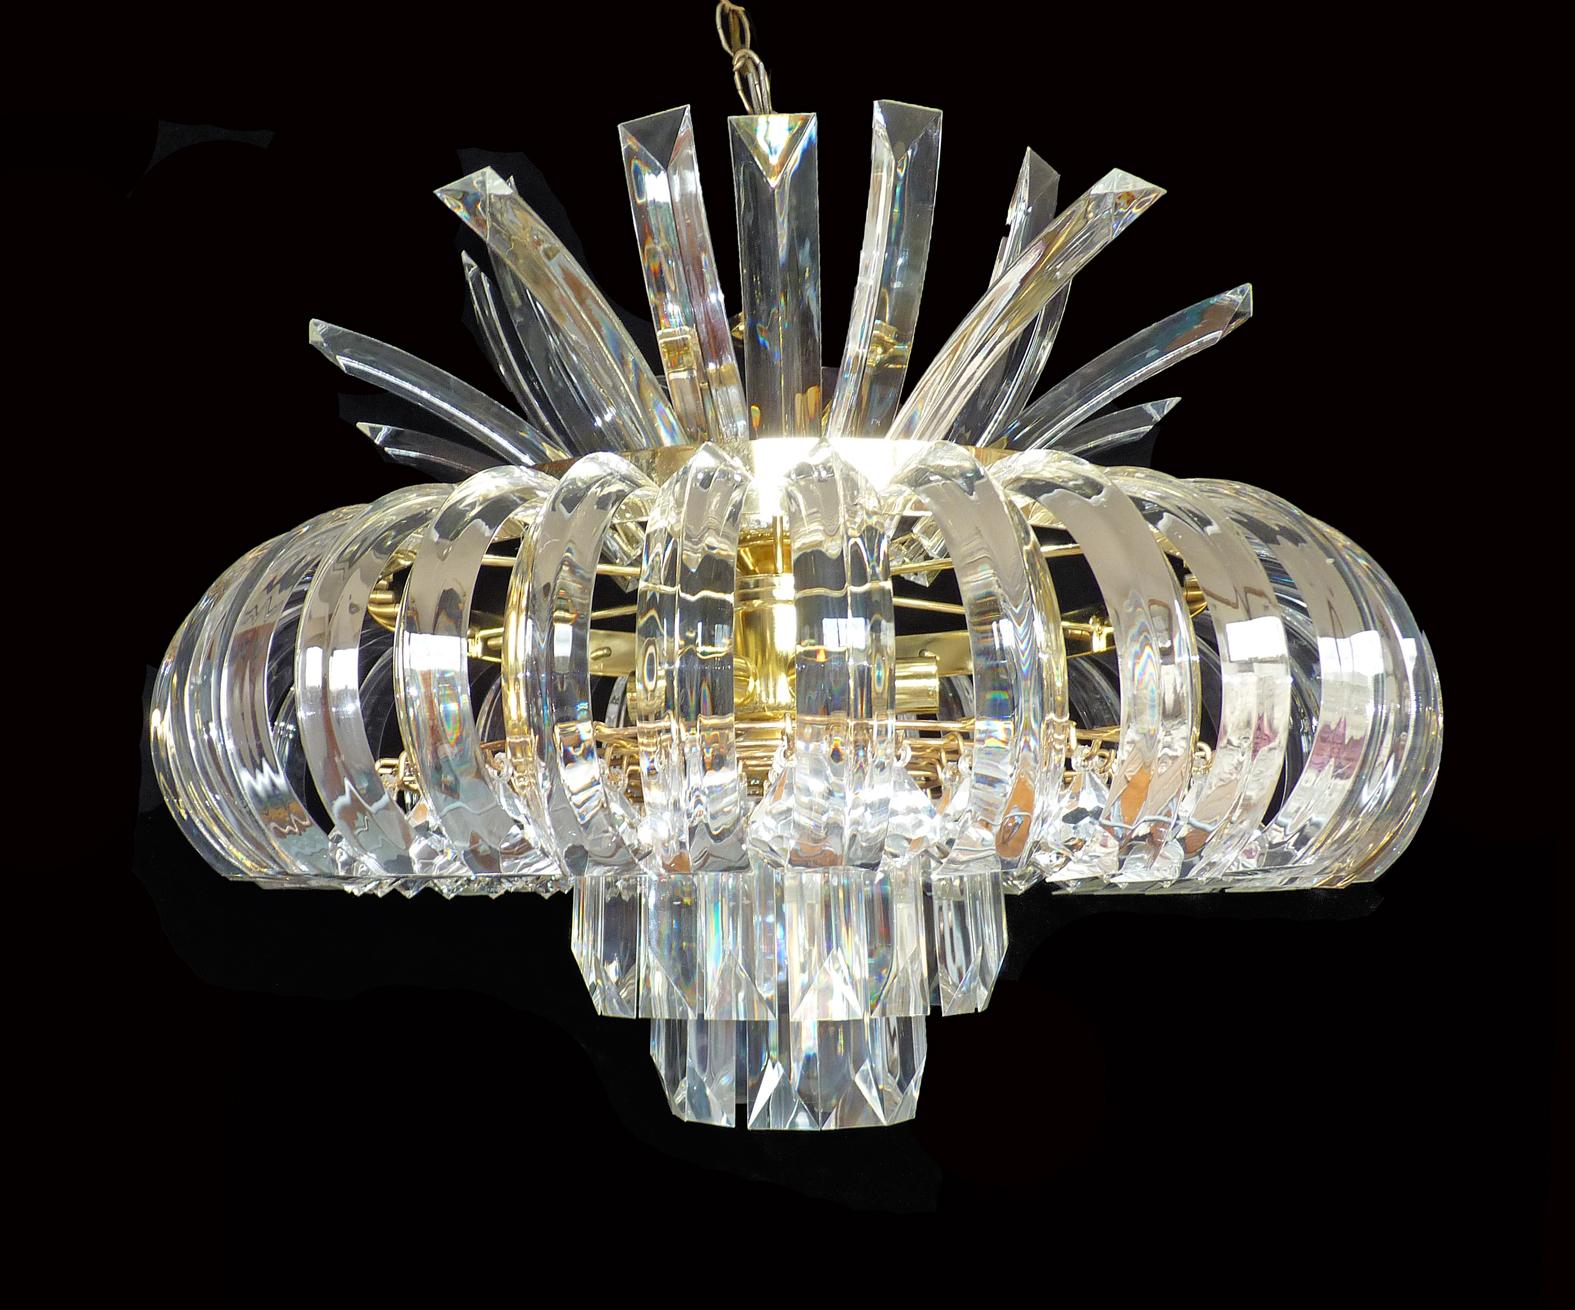 Large sculptural Italian curved Lucite gilt 9-light sparkly, 6 tiers wedding cake chandelier. Pair available.
A very nice 1970 light, it could be hung flush or hanging on a chain, if you want it flush, it could be only 10 inch high, or 20 inch if